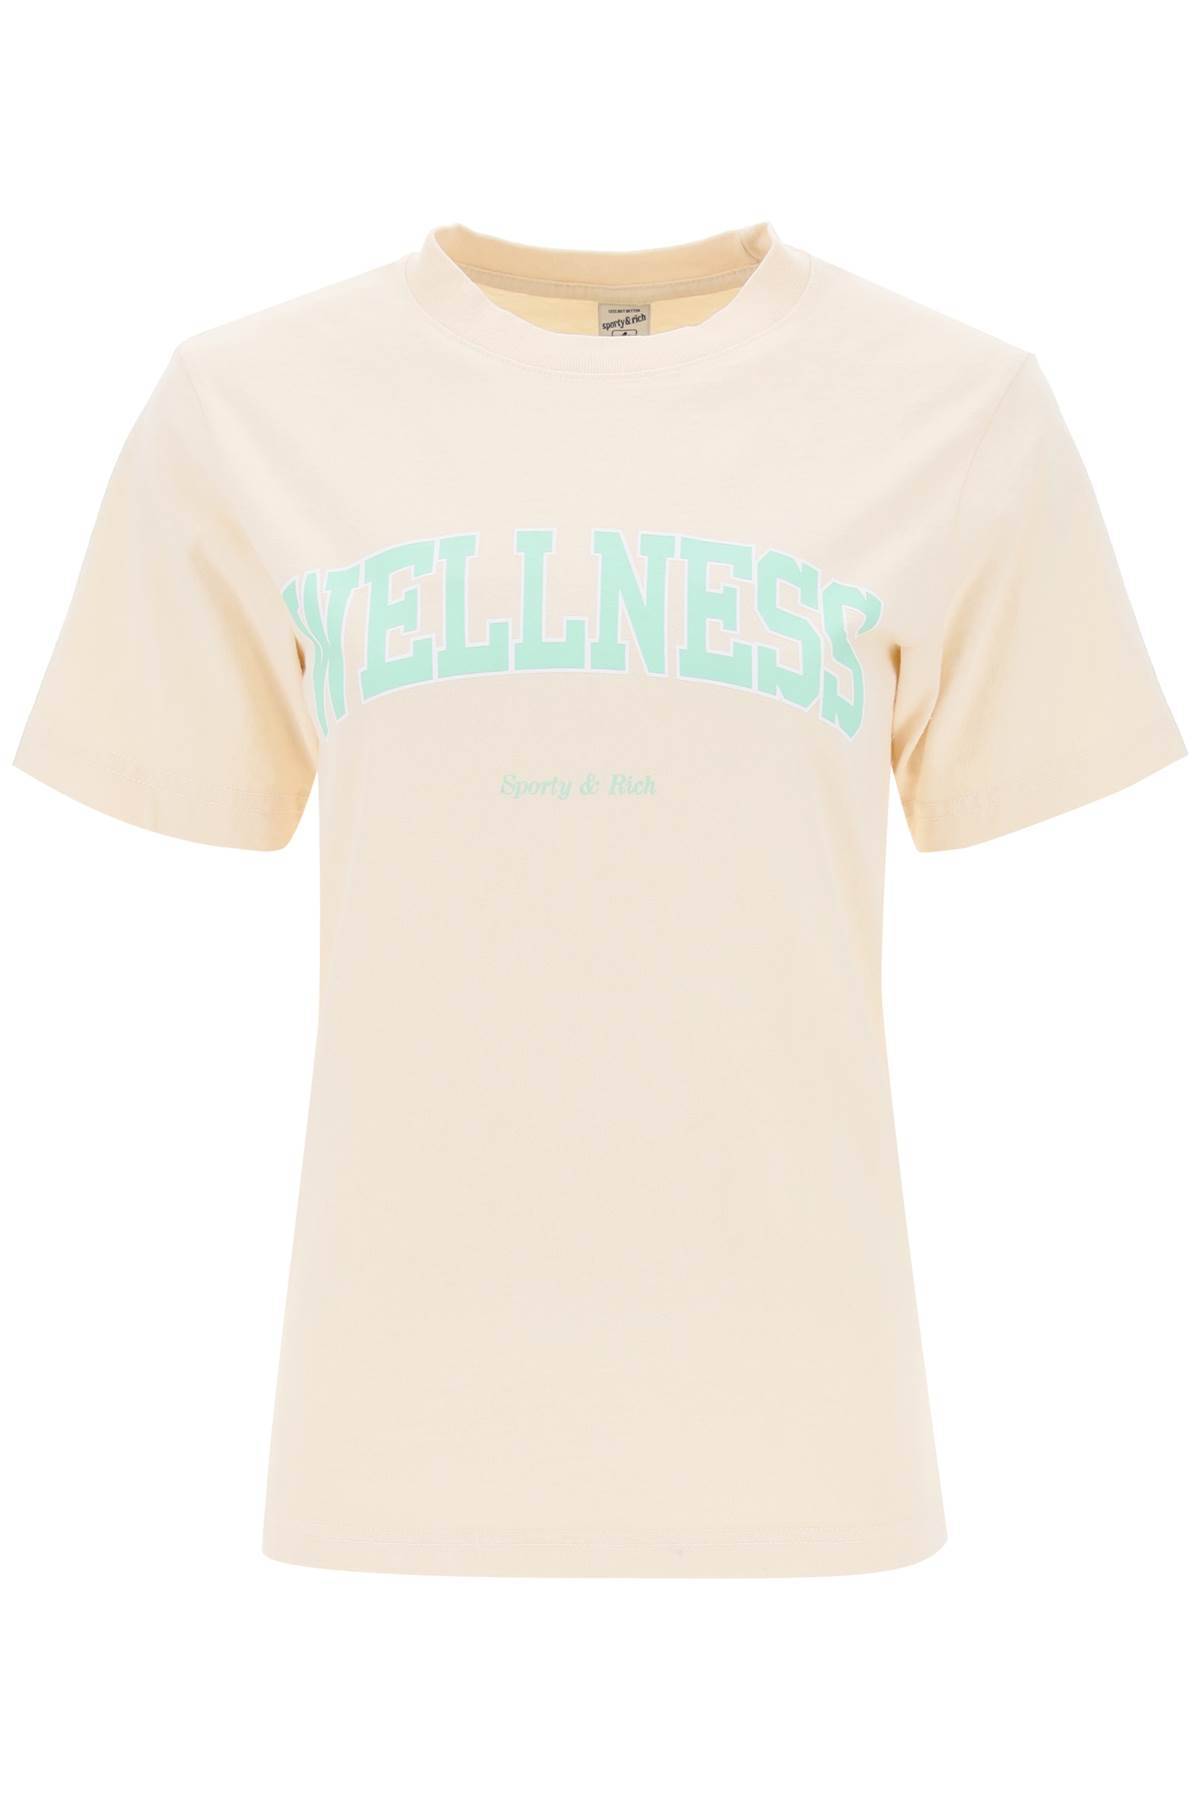 SPORTY AND RICH WELLNESS IVY T-SHIRT